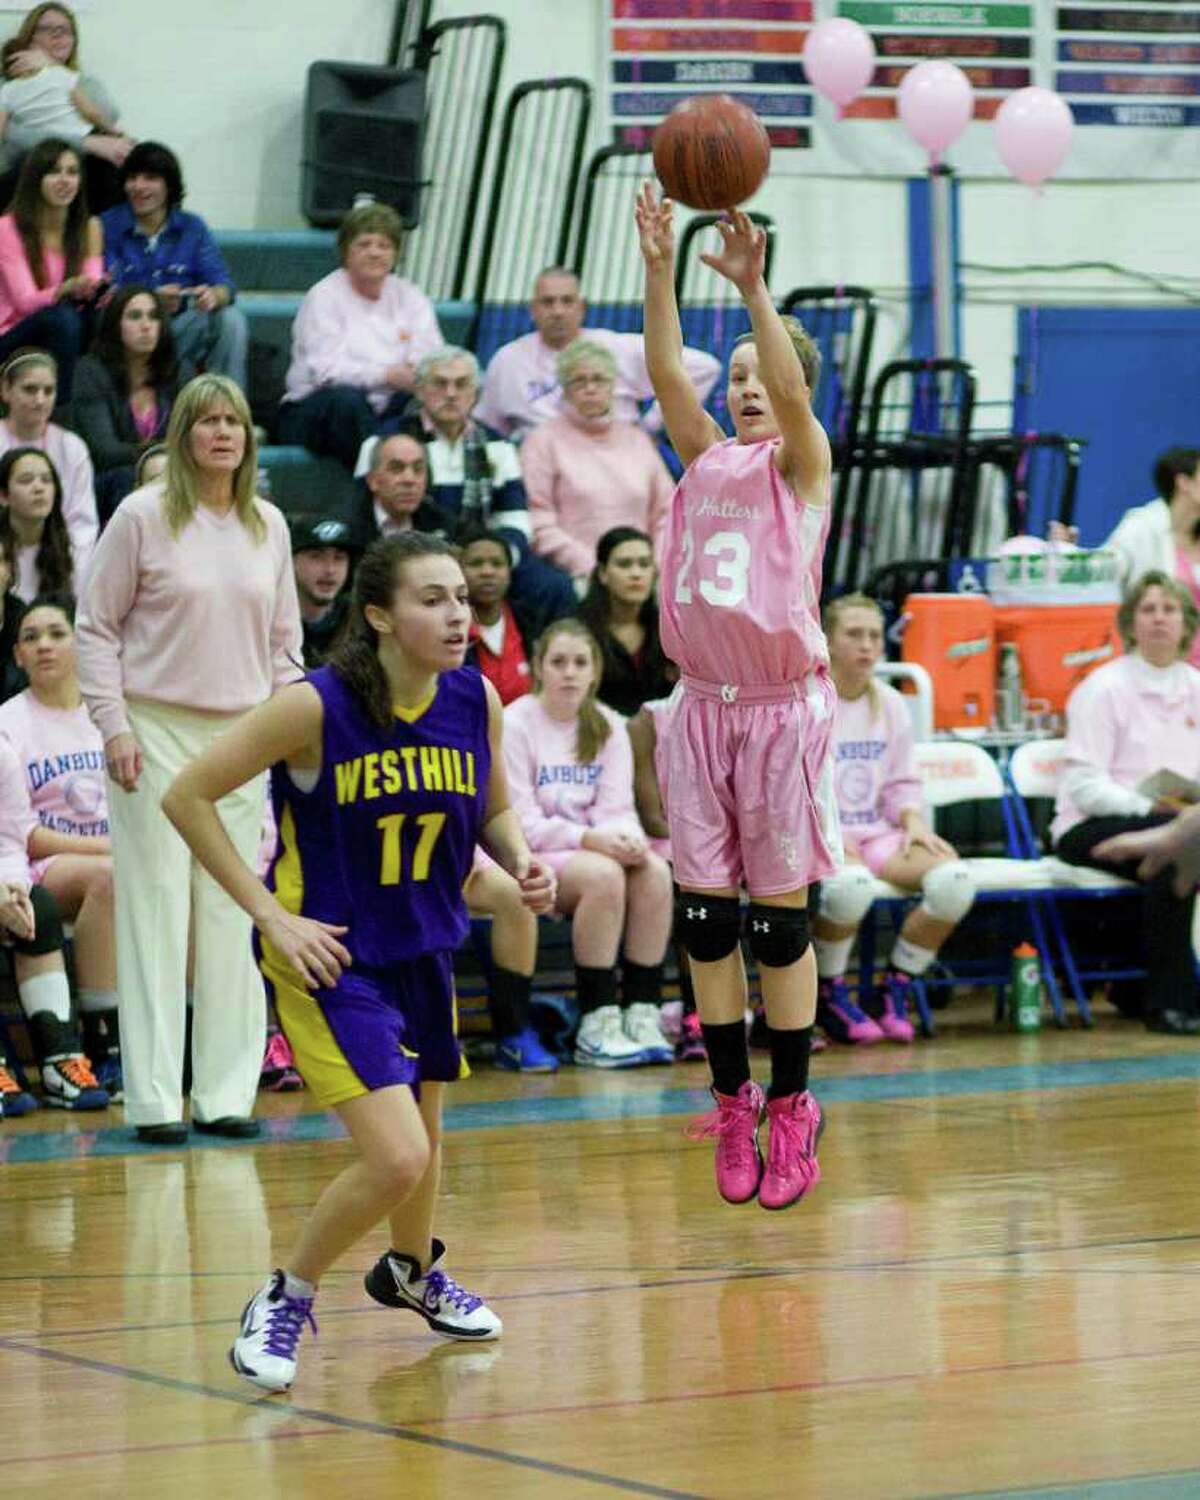 Danbury's Becca Gartner puts up an outside shot during the Cancer Awareness game against Westhill Friday night at Danbury High School. The Westhill defender is Megan D'Alessandro.